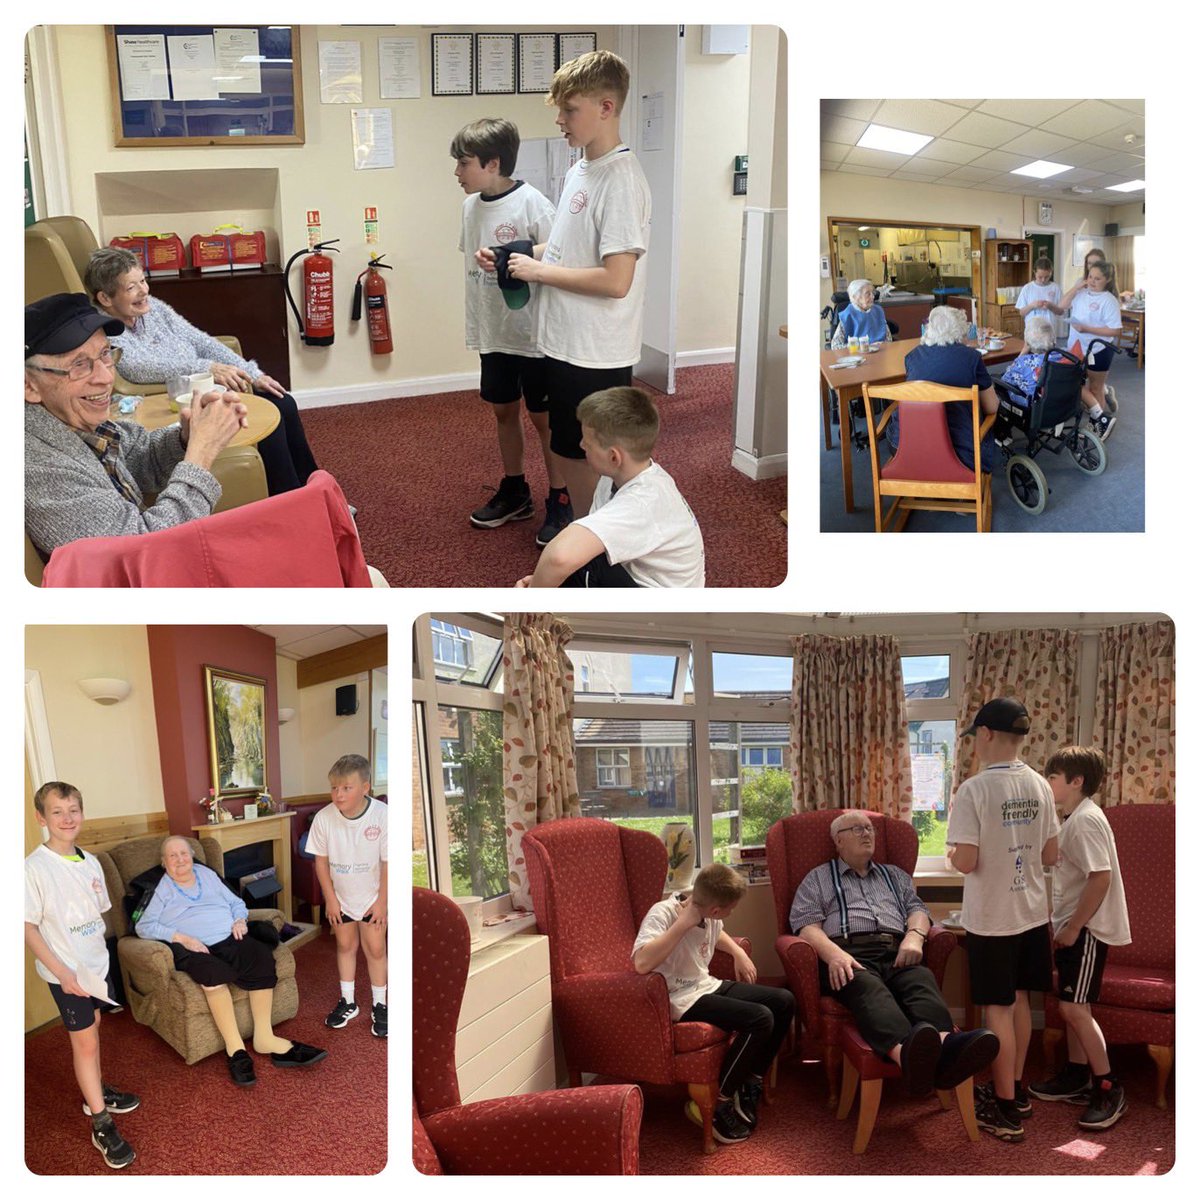 A chance this week to listen to our friends in Trenewydd about their amazing lives!! Living history lesson. Priceless 👍 @DementiaPowys #authenticlearning